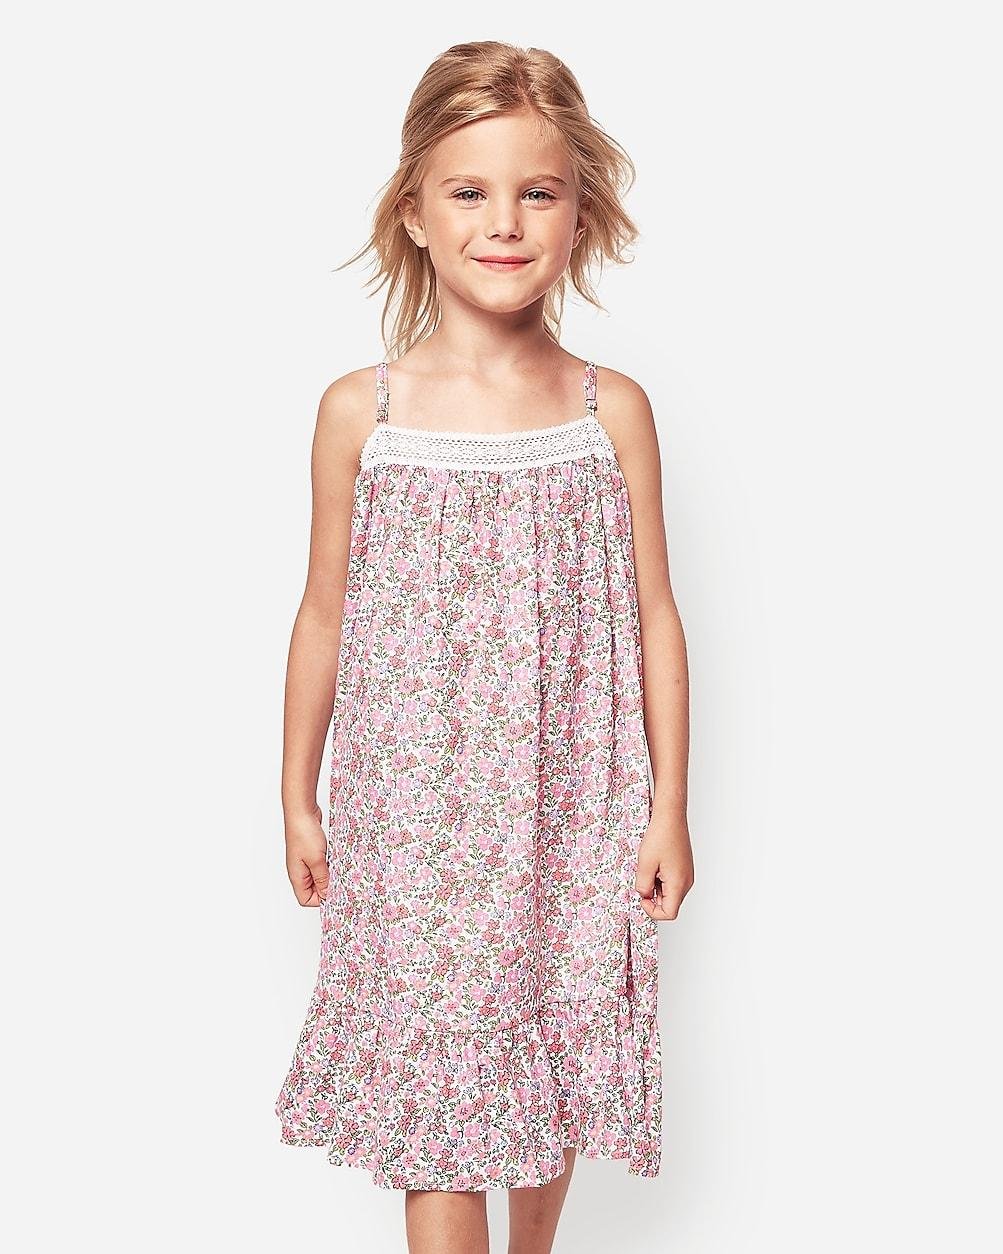 Petite Plume™ girls' Lily nightgown by J.CREW